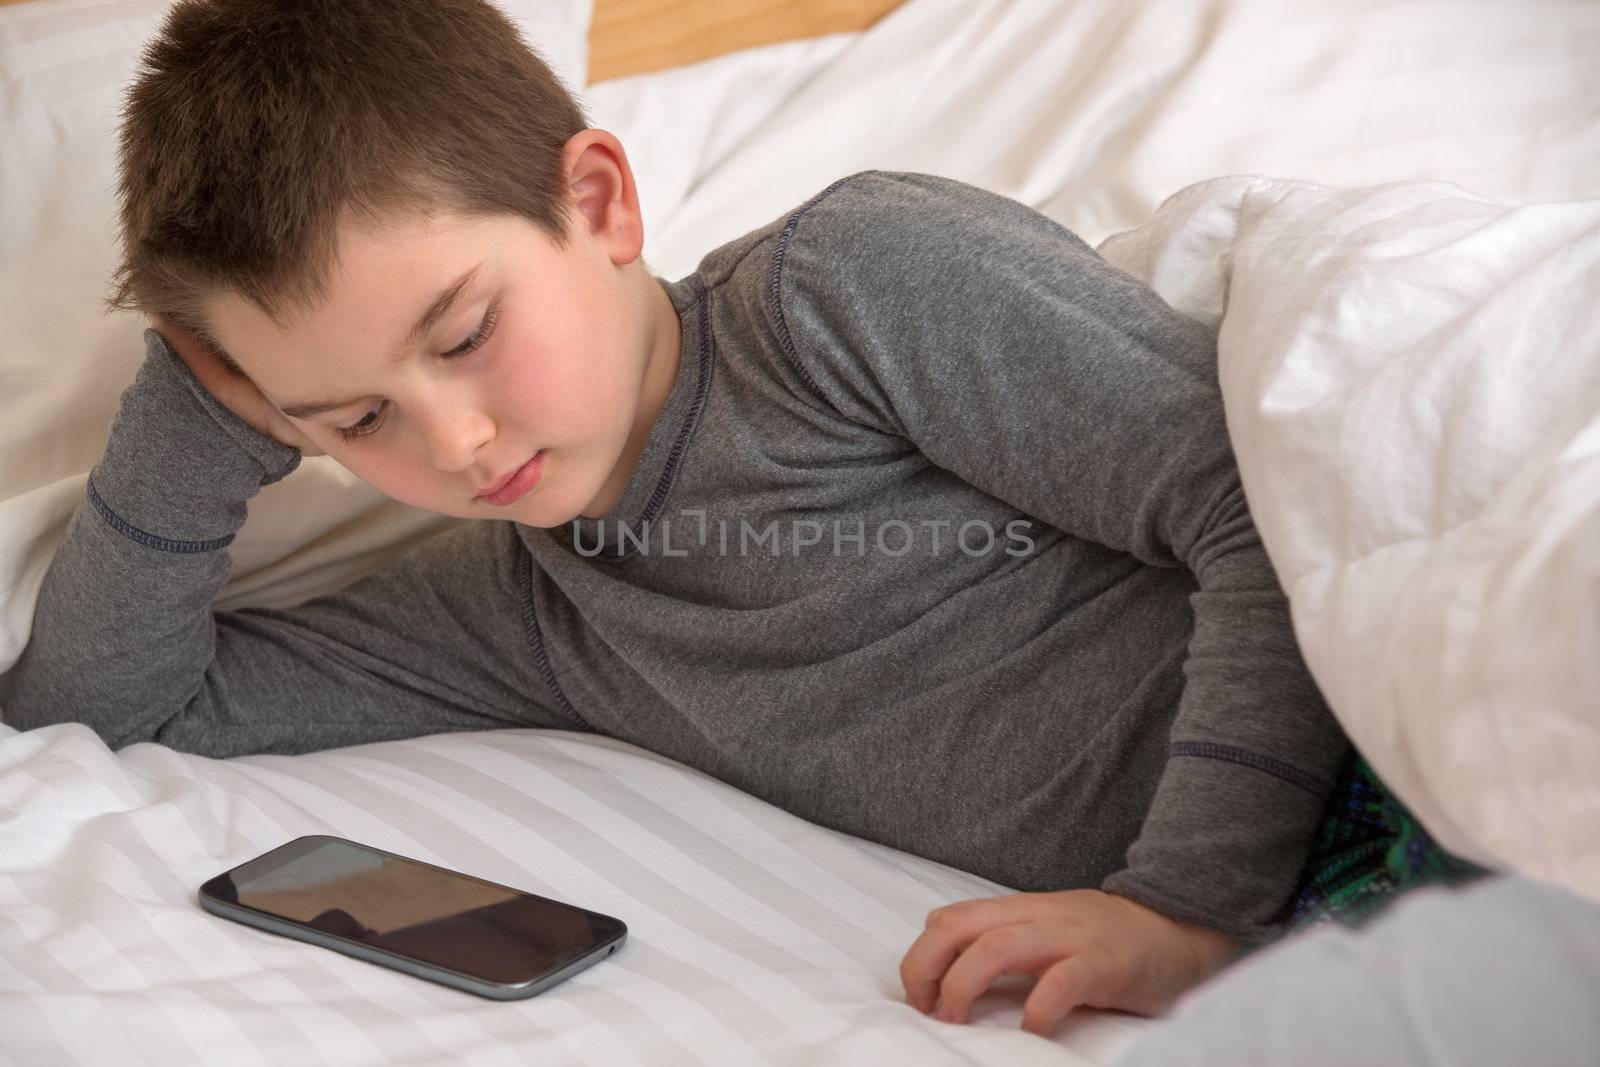 Eight years old kid watching shows on daddy's smart phone before he goes to sleep.